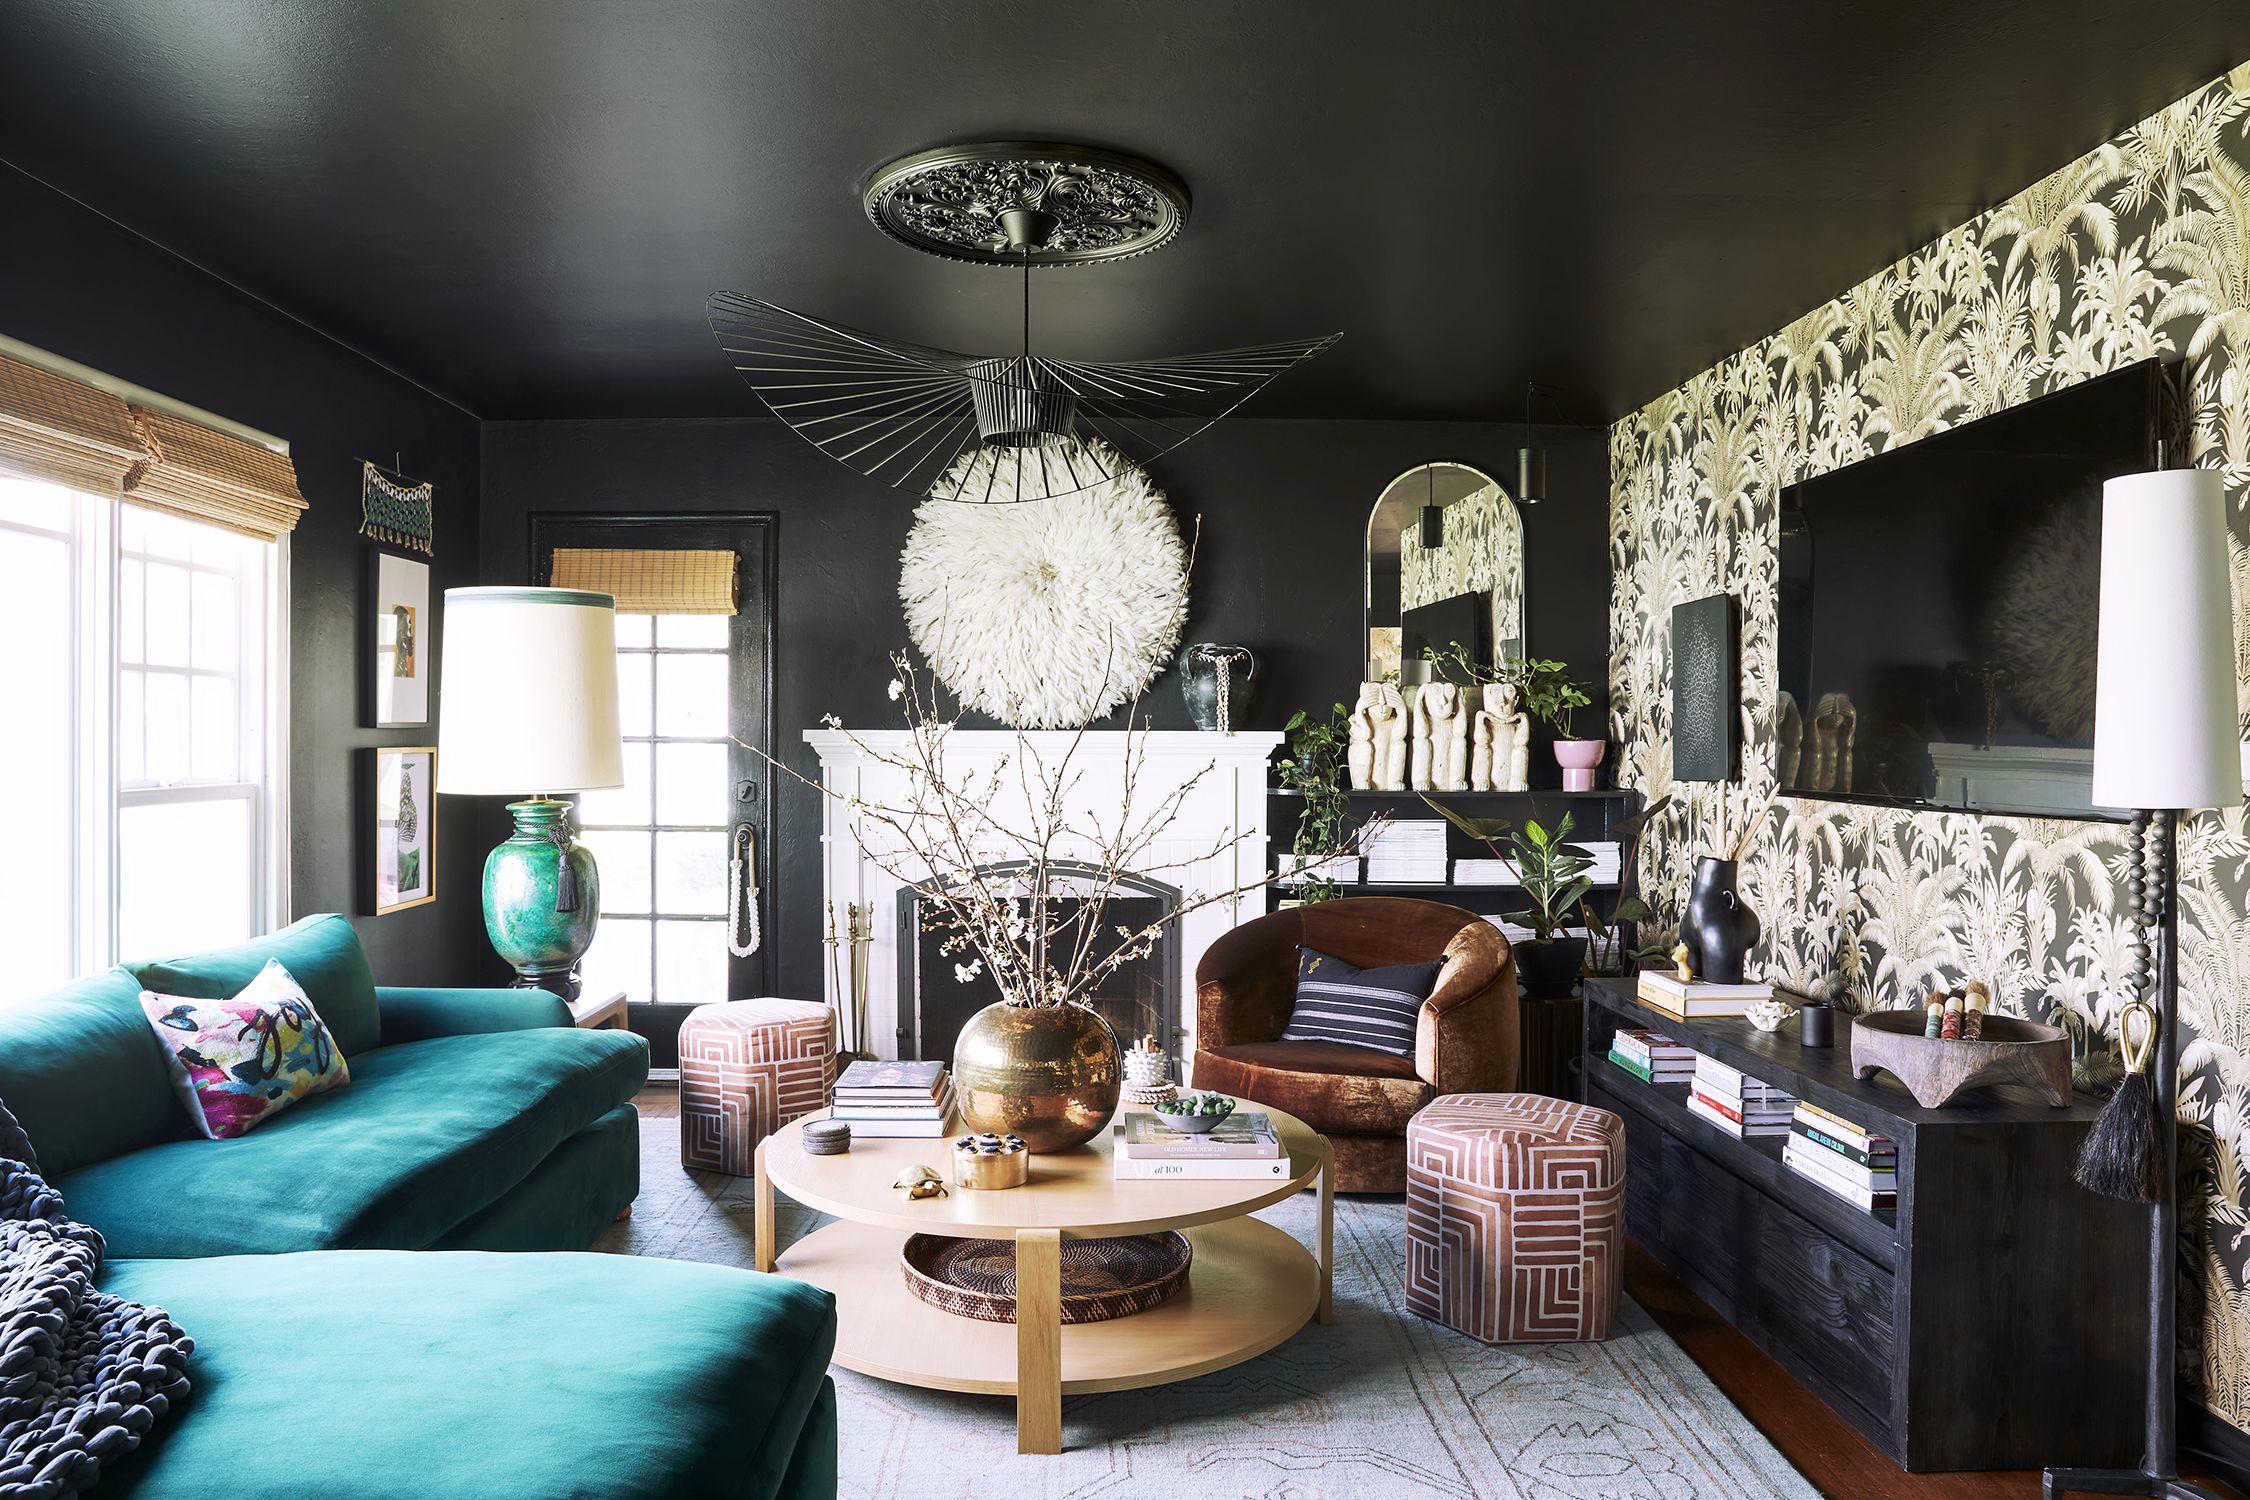 How to Decorate with Jewel Tones Like a Designer